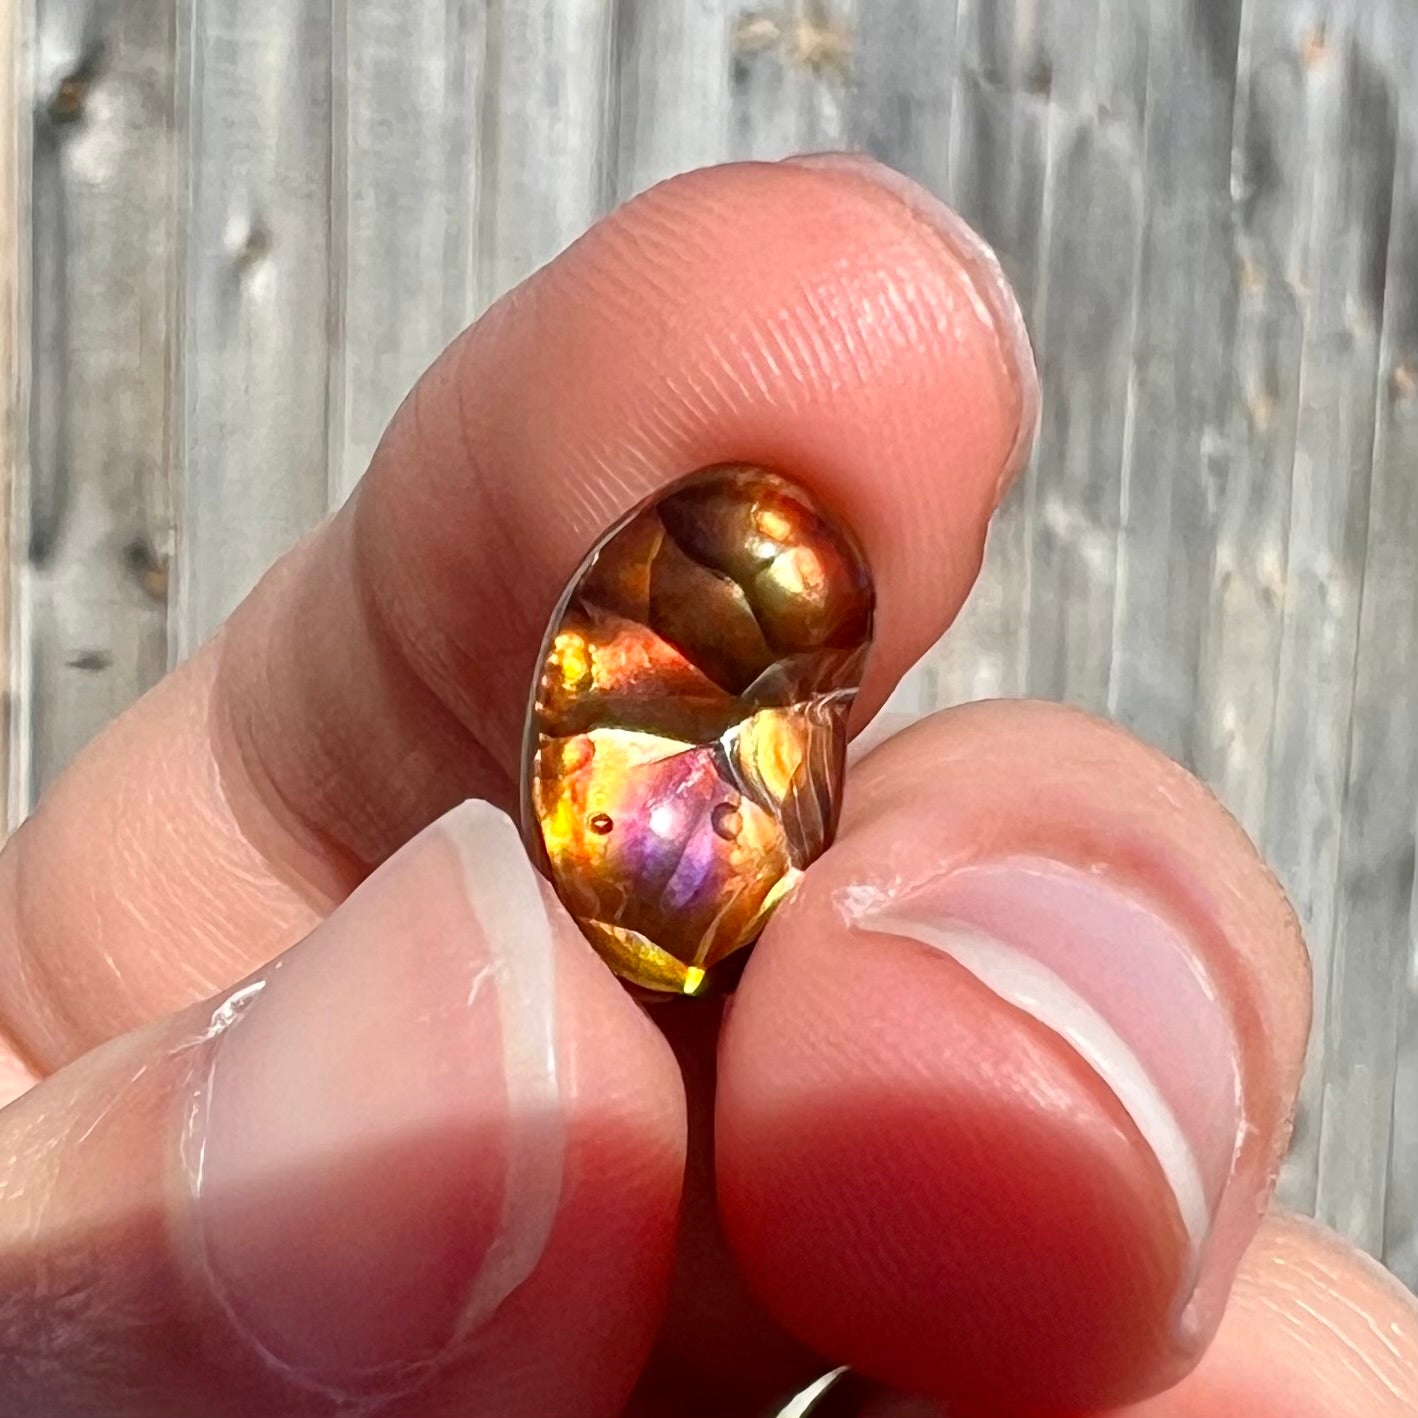 A loose Mexican fire agate gemstone.  The stone is red with a puddle of purple and exhibits a metallic luster.